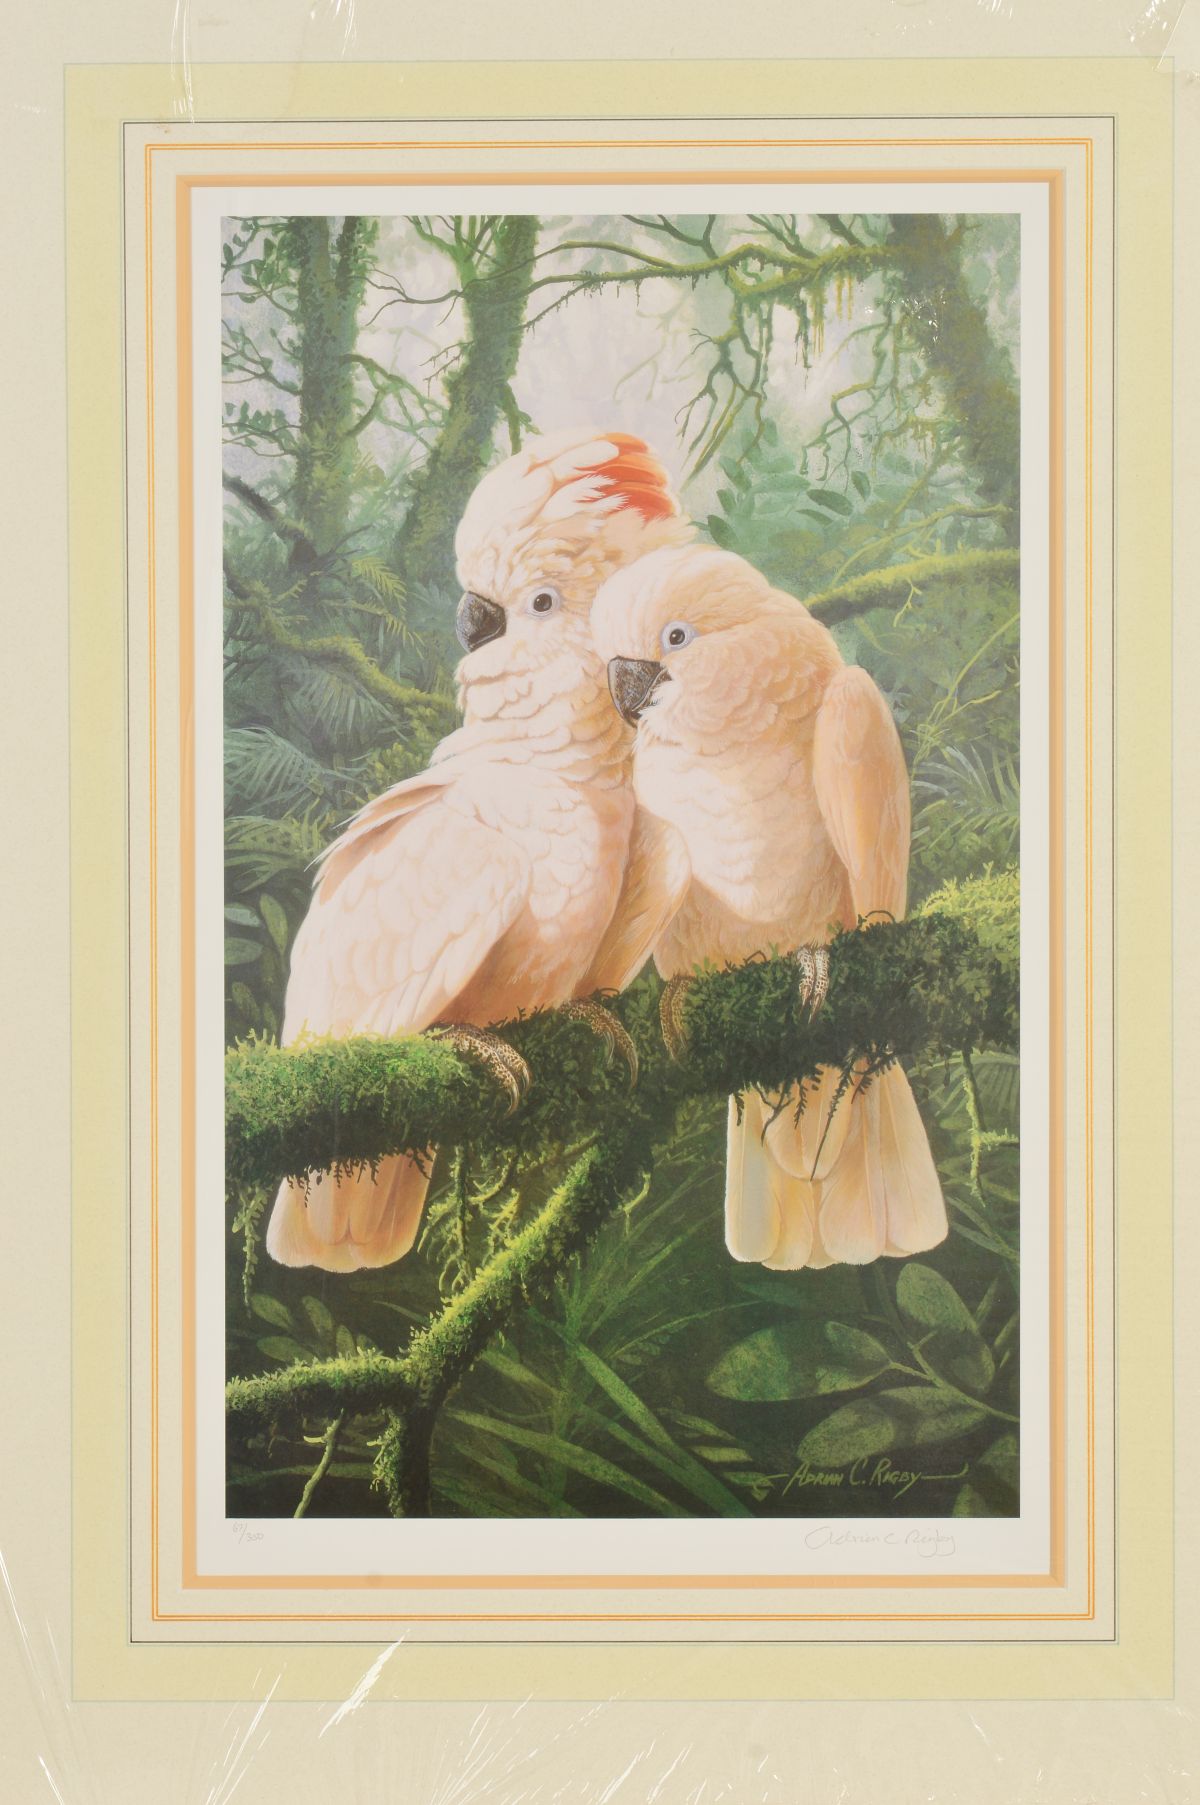 ADRIAN RIGBY (BRITISH 1962), 'Majestic Moluccans', a limited edition print of a pair of Cockatoo'